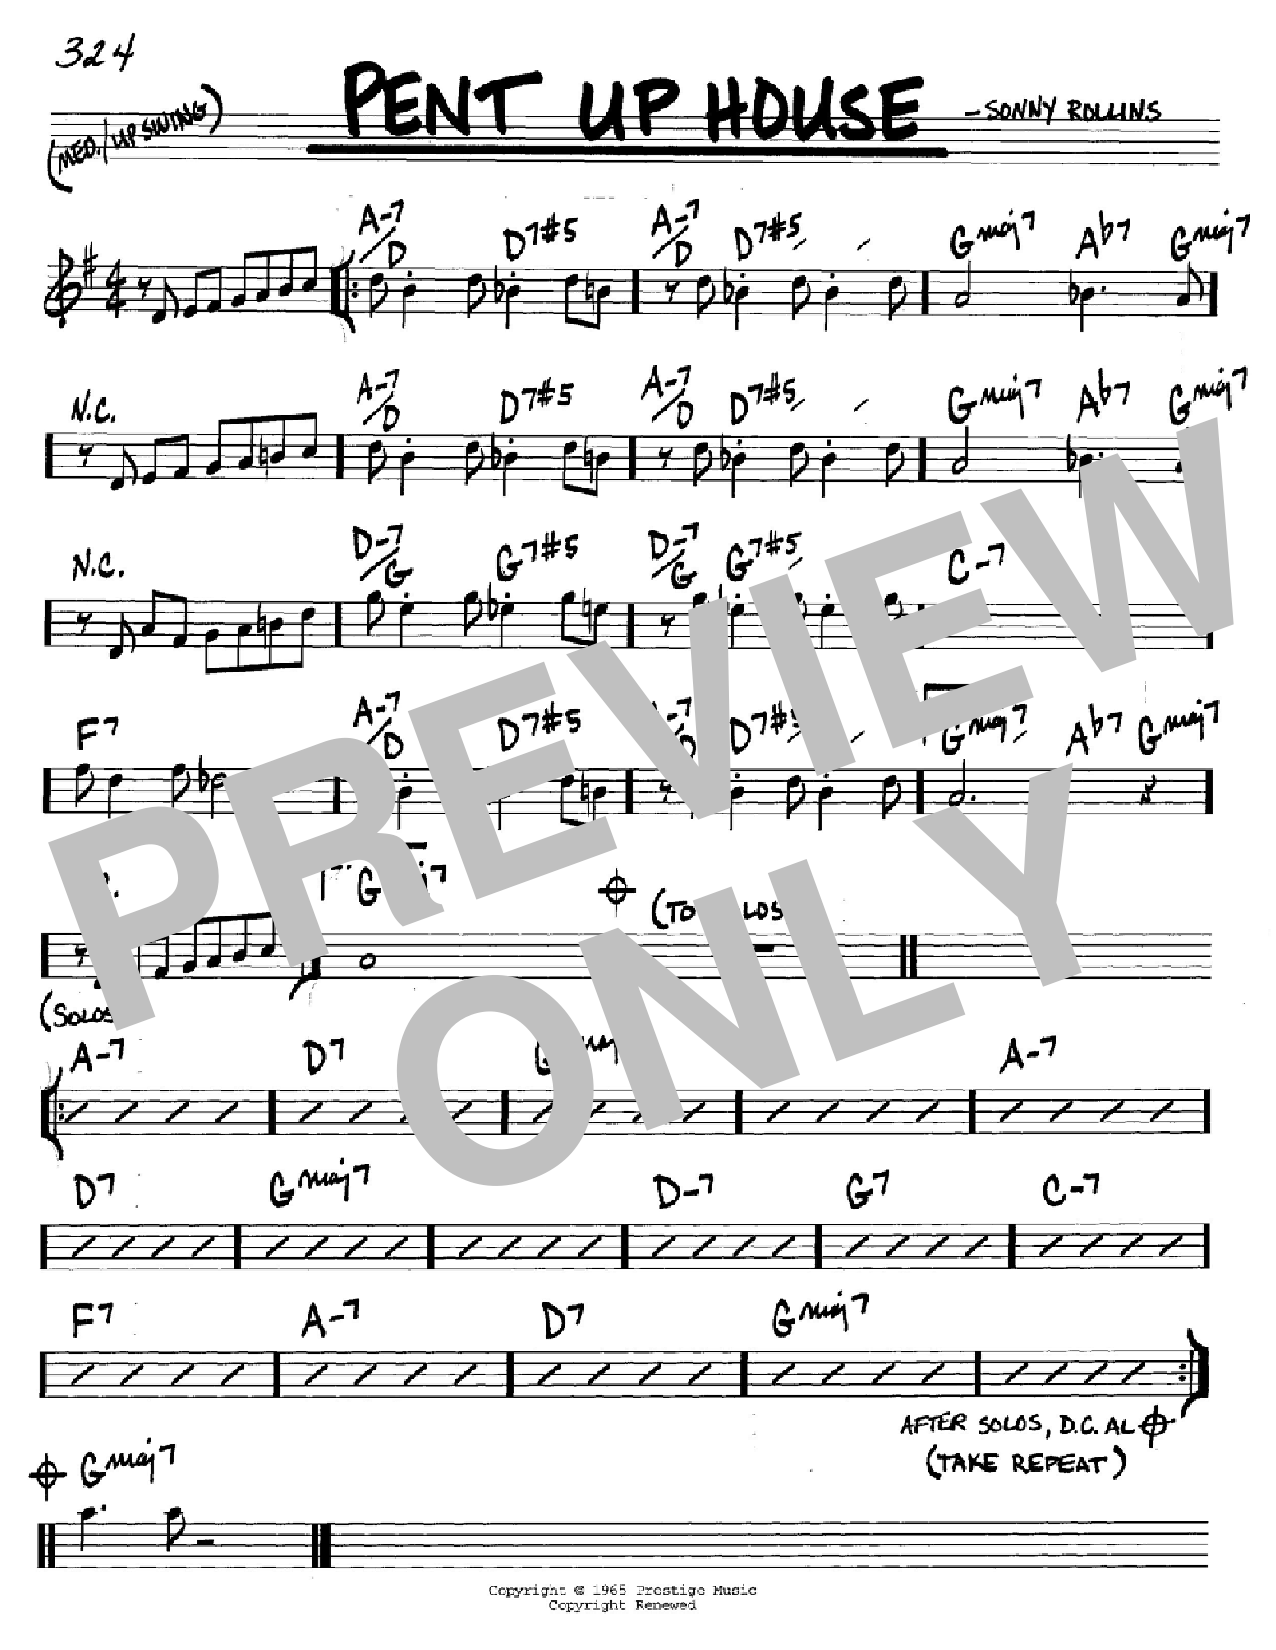 Sonny Rollins Pent Up House sheet music notes and chords. Download Printable PDF.